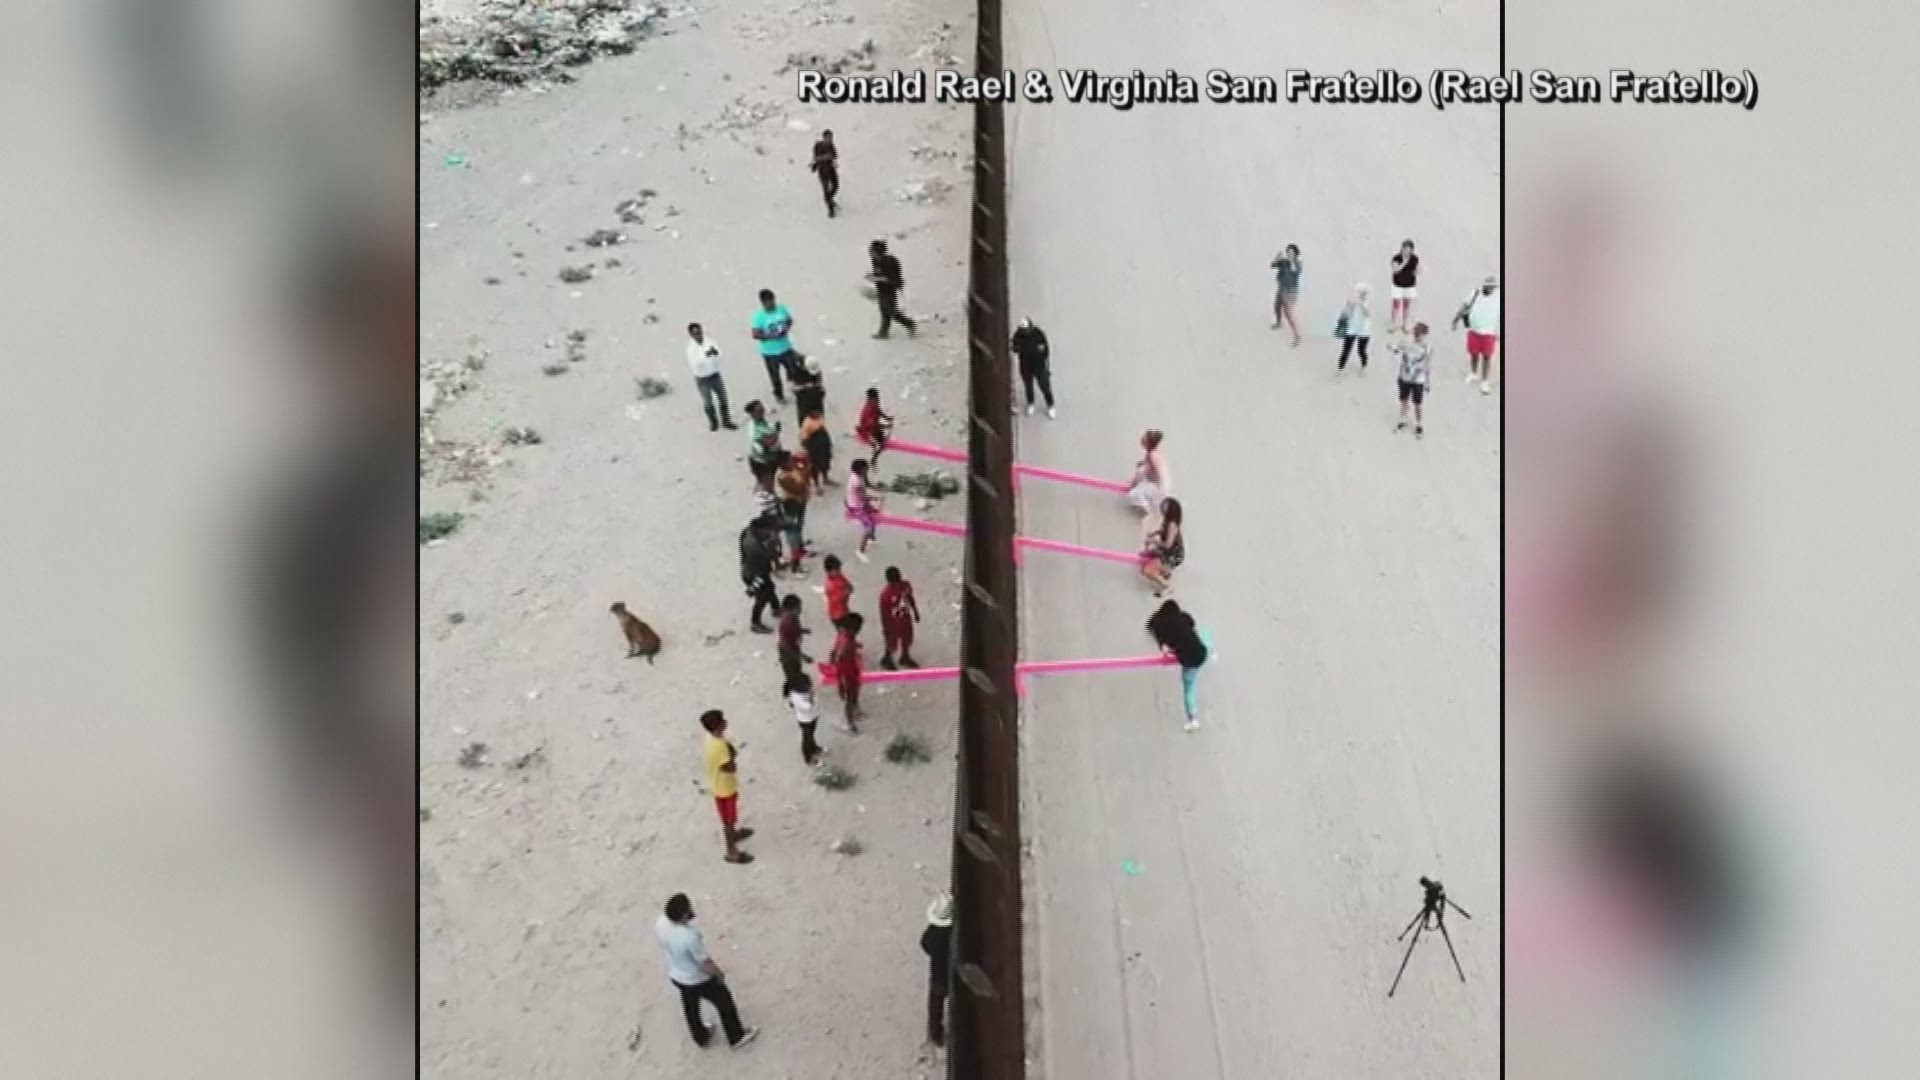 An artist creates an interactive piece that allows people from both sides of the U.S.-Mexico border to play together.